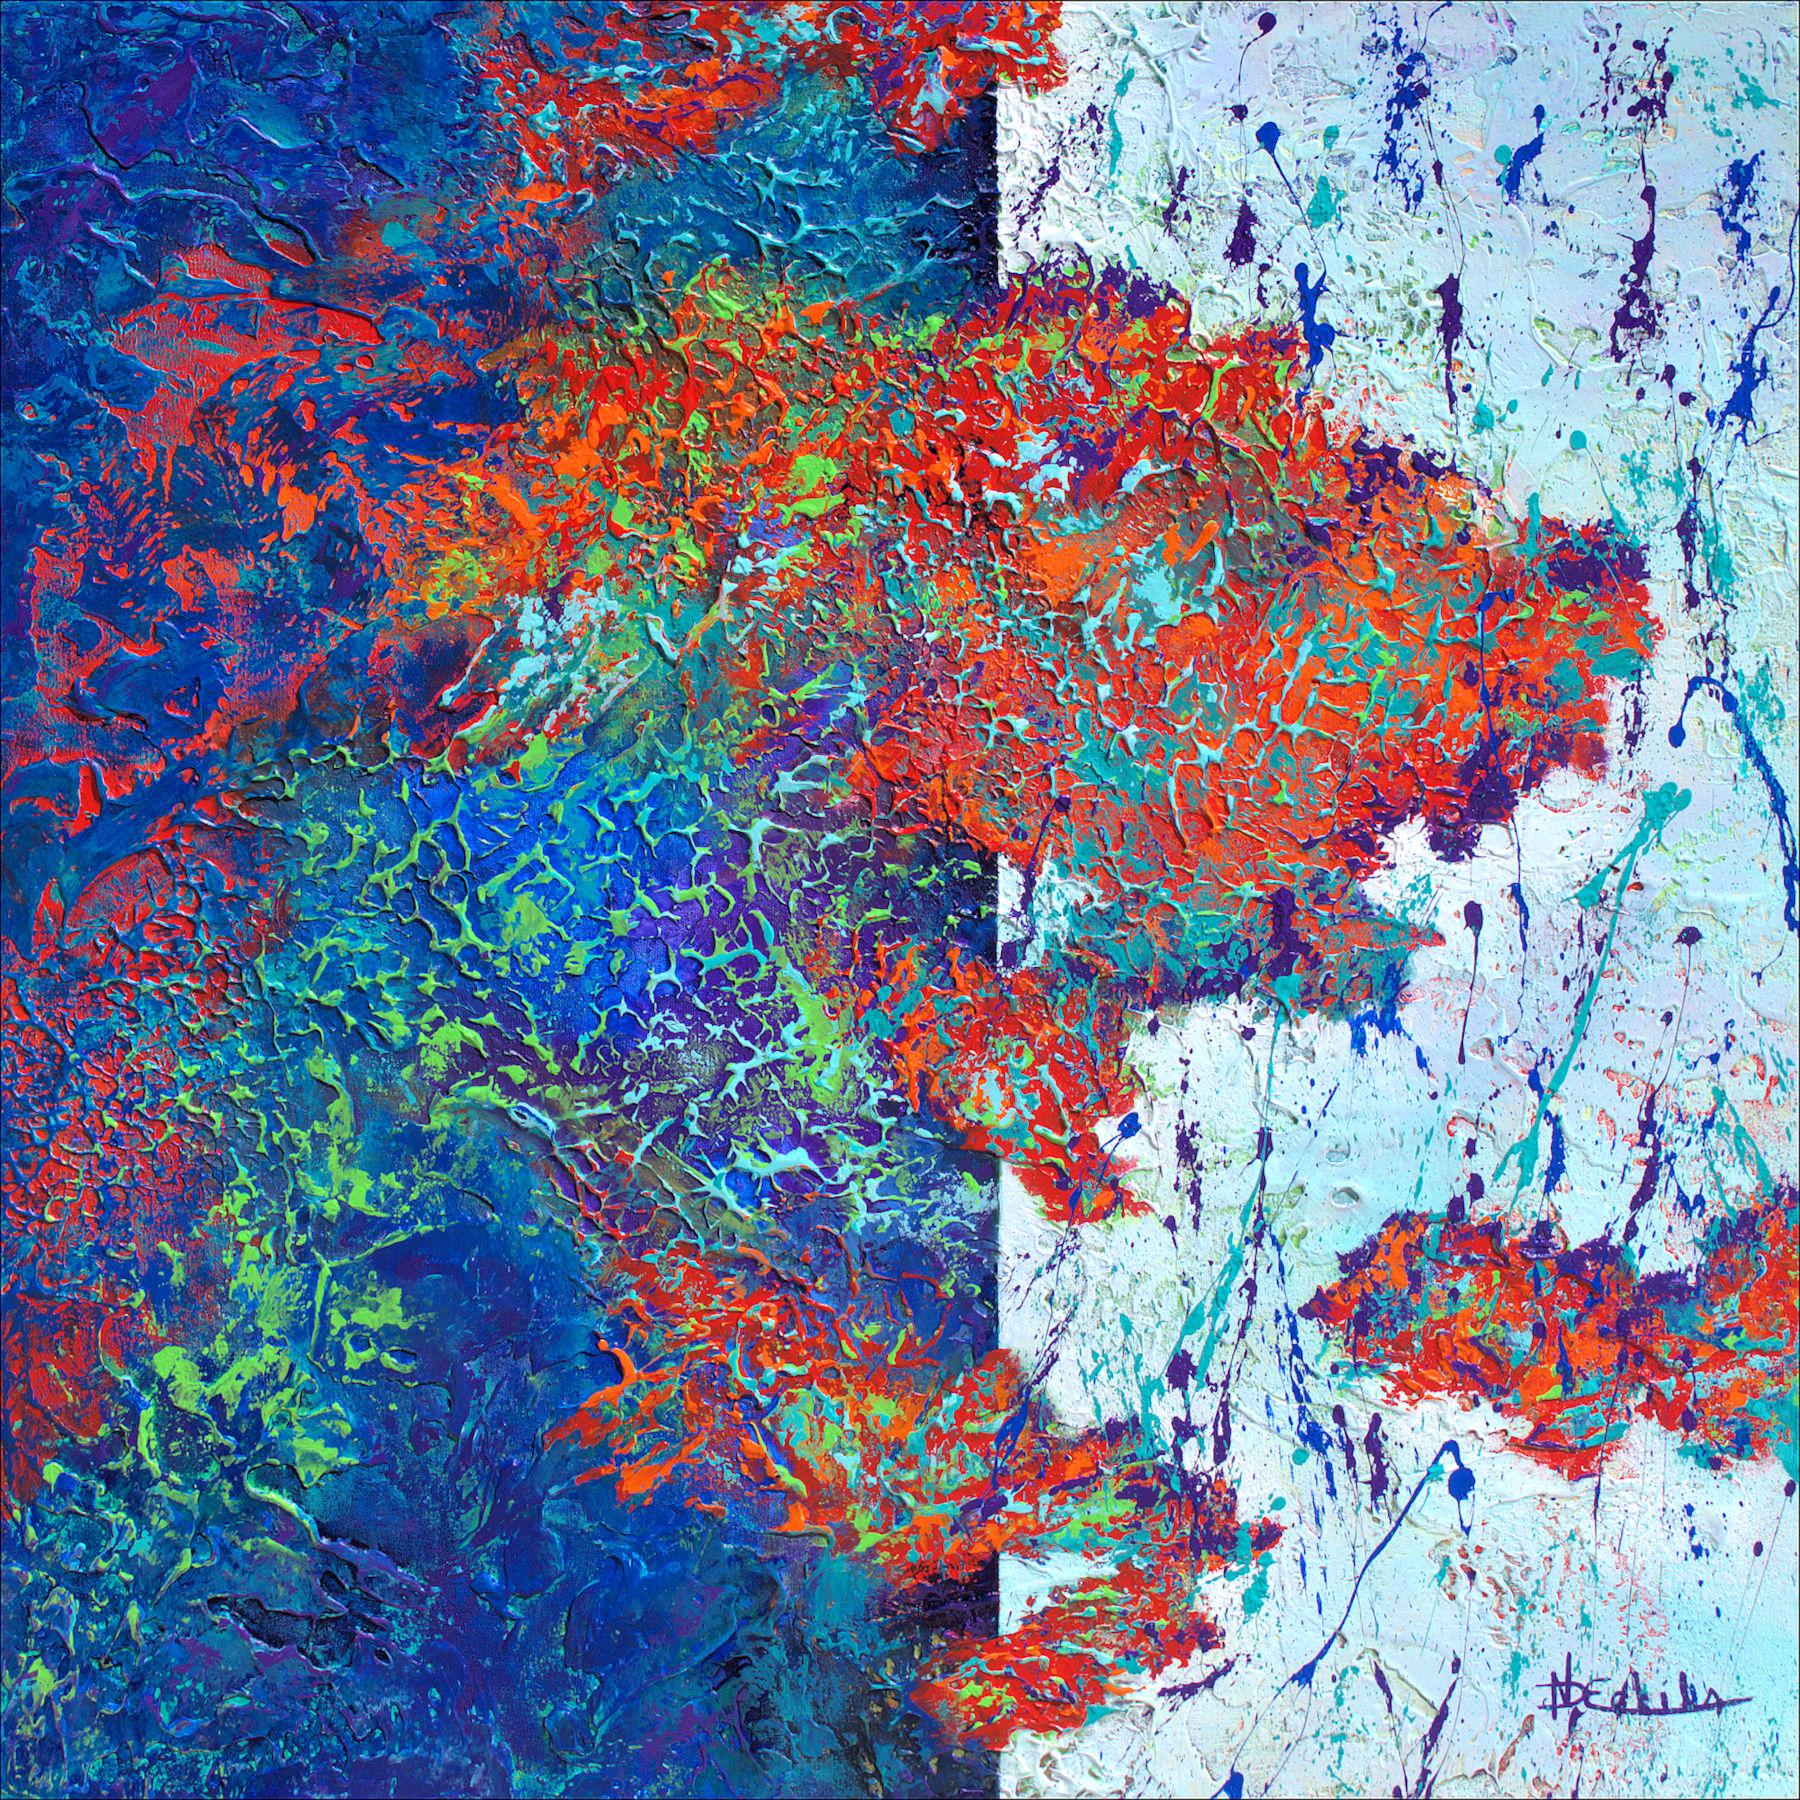 "Dare To Cross Line" The Mixed Media abstract with textural purples, blues, reds - Mixed Media Art by Nancy Eckels